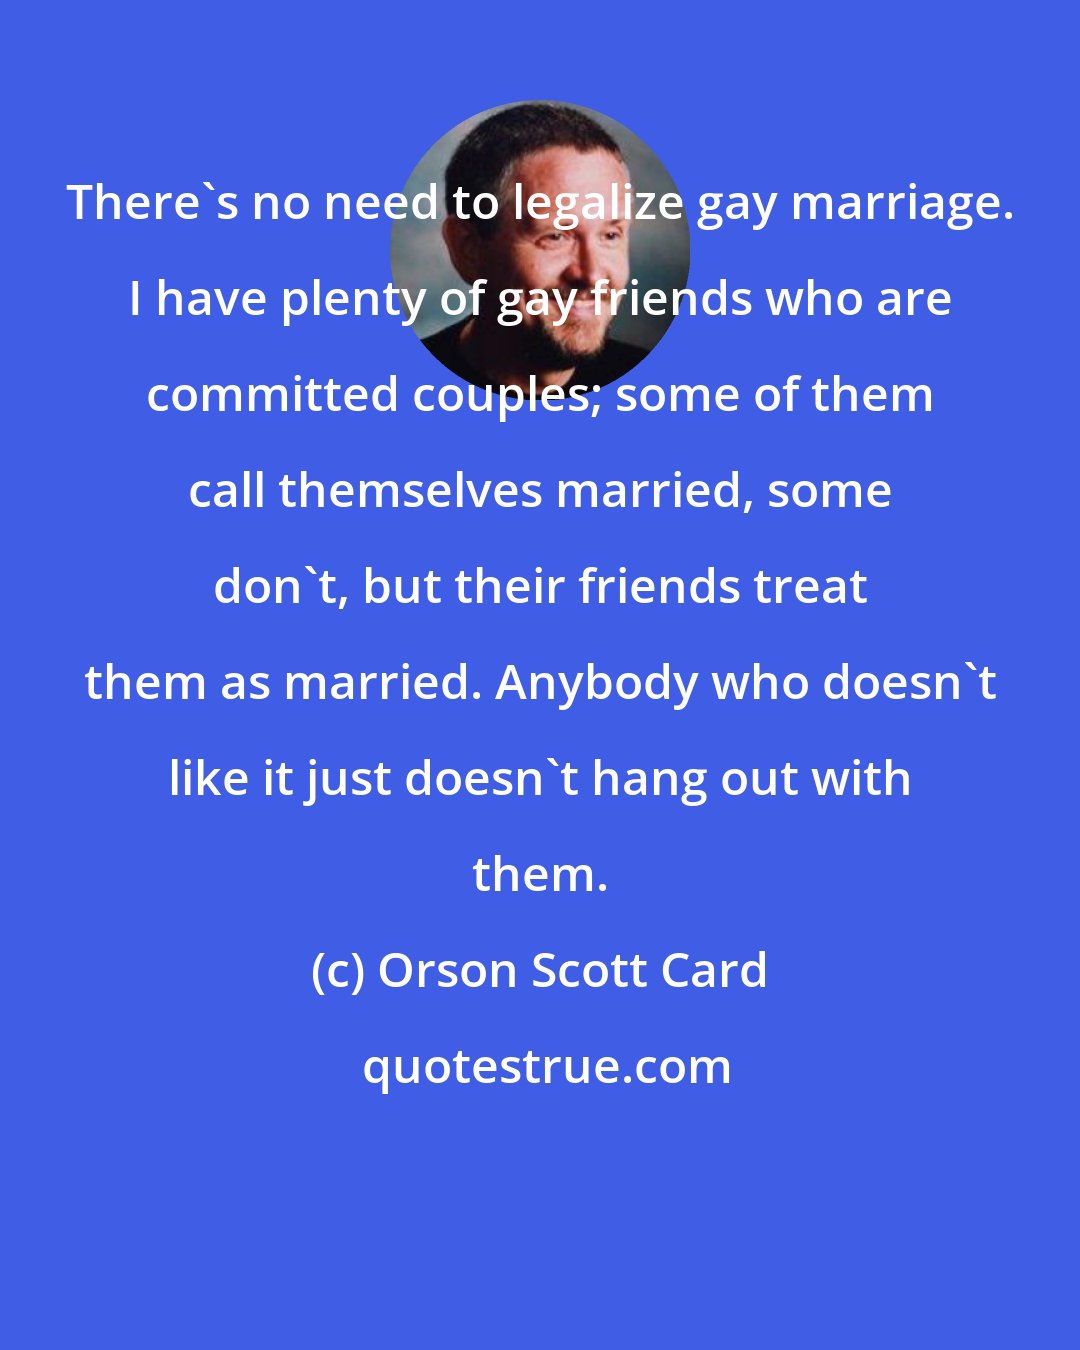 Orson Scott Card: There's no need to legalize gay marriage. I have plenty of gay friends who are committed couples; some of them call themselves married, some don't, but their friends treat them as married. Anybody who doesn't like it just doesn't hang out with them.